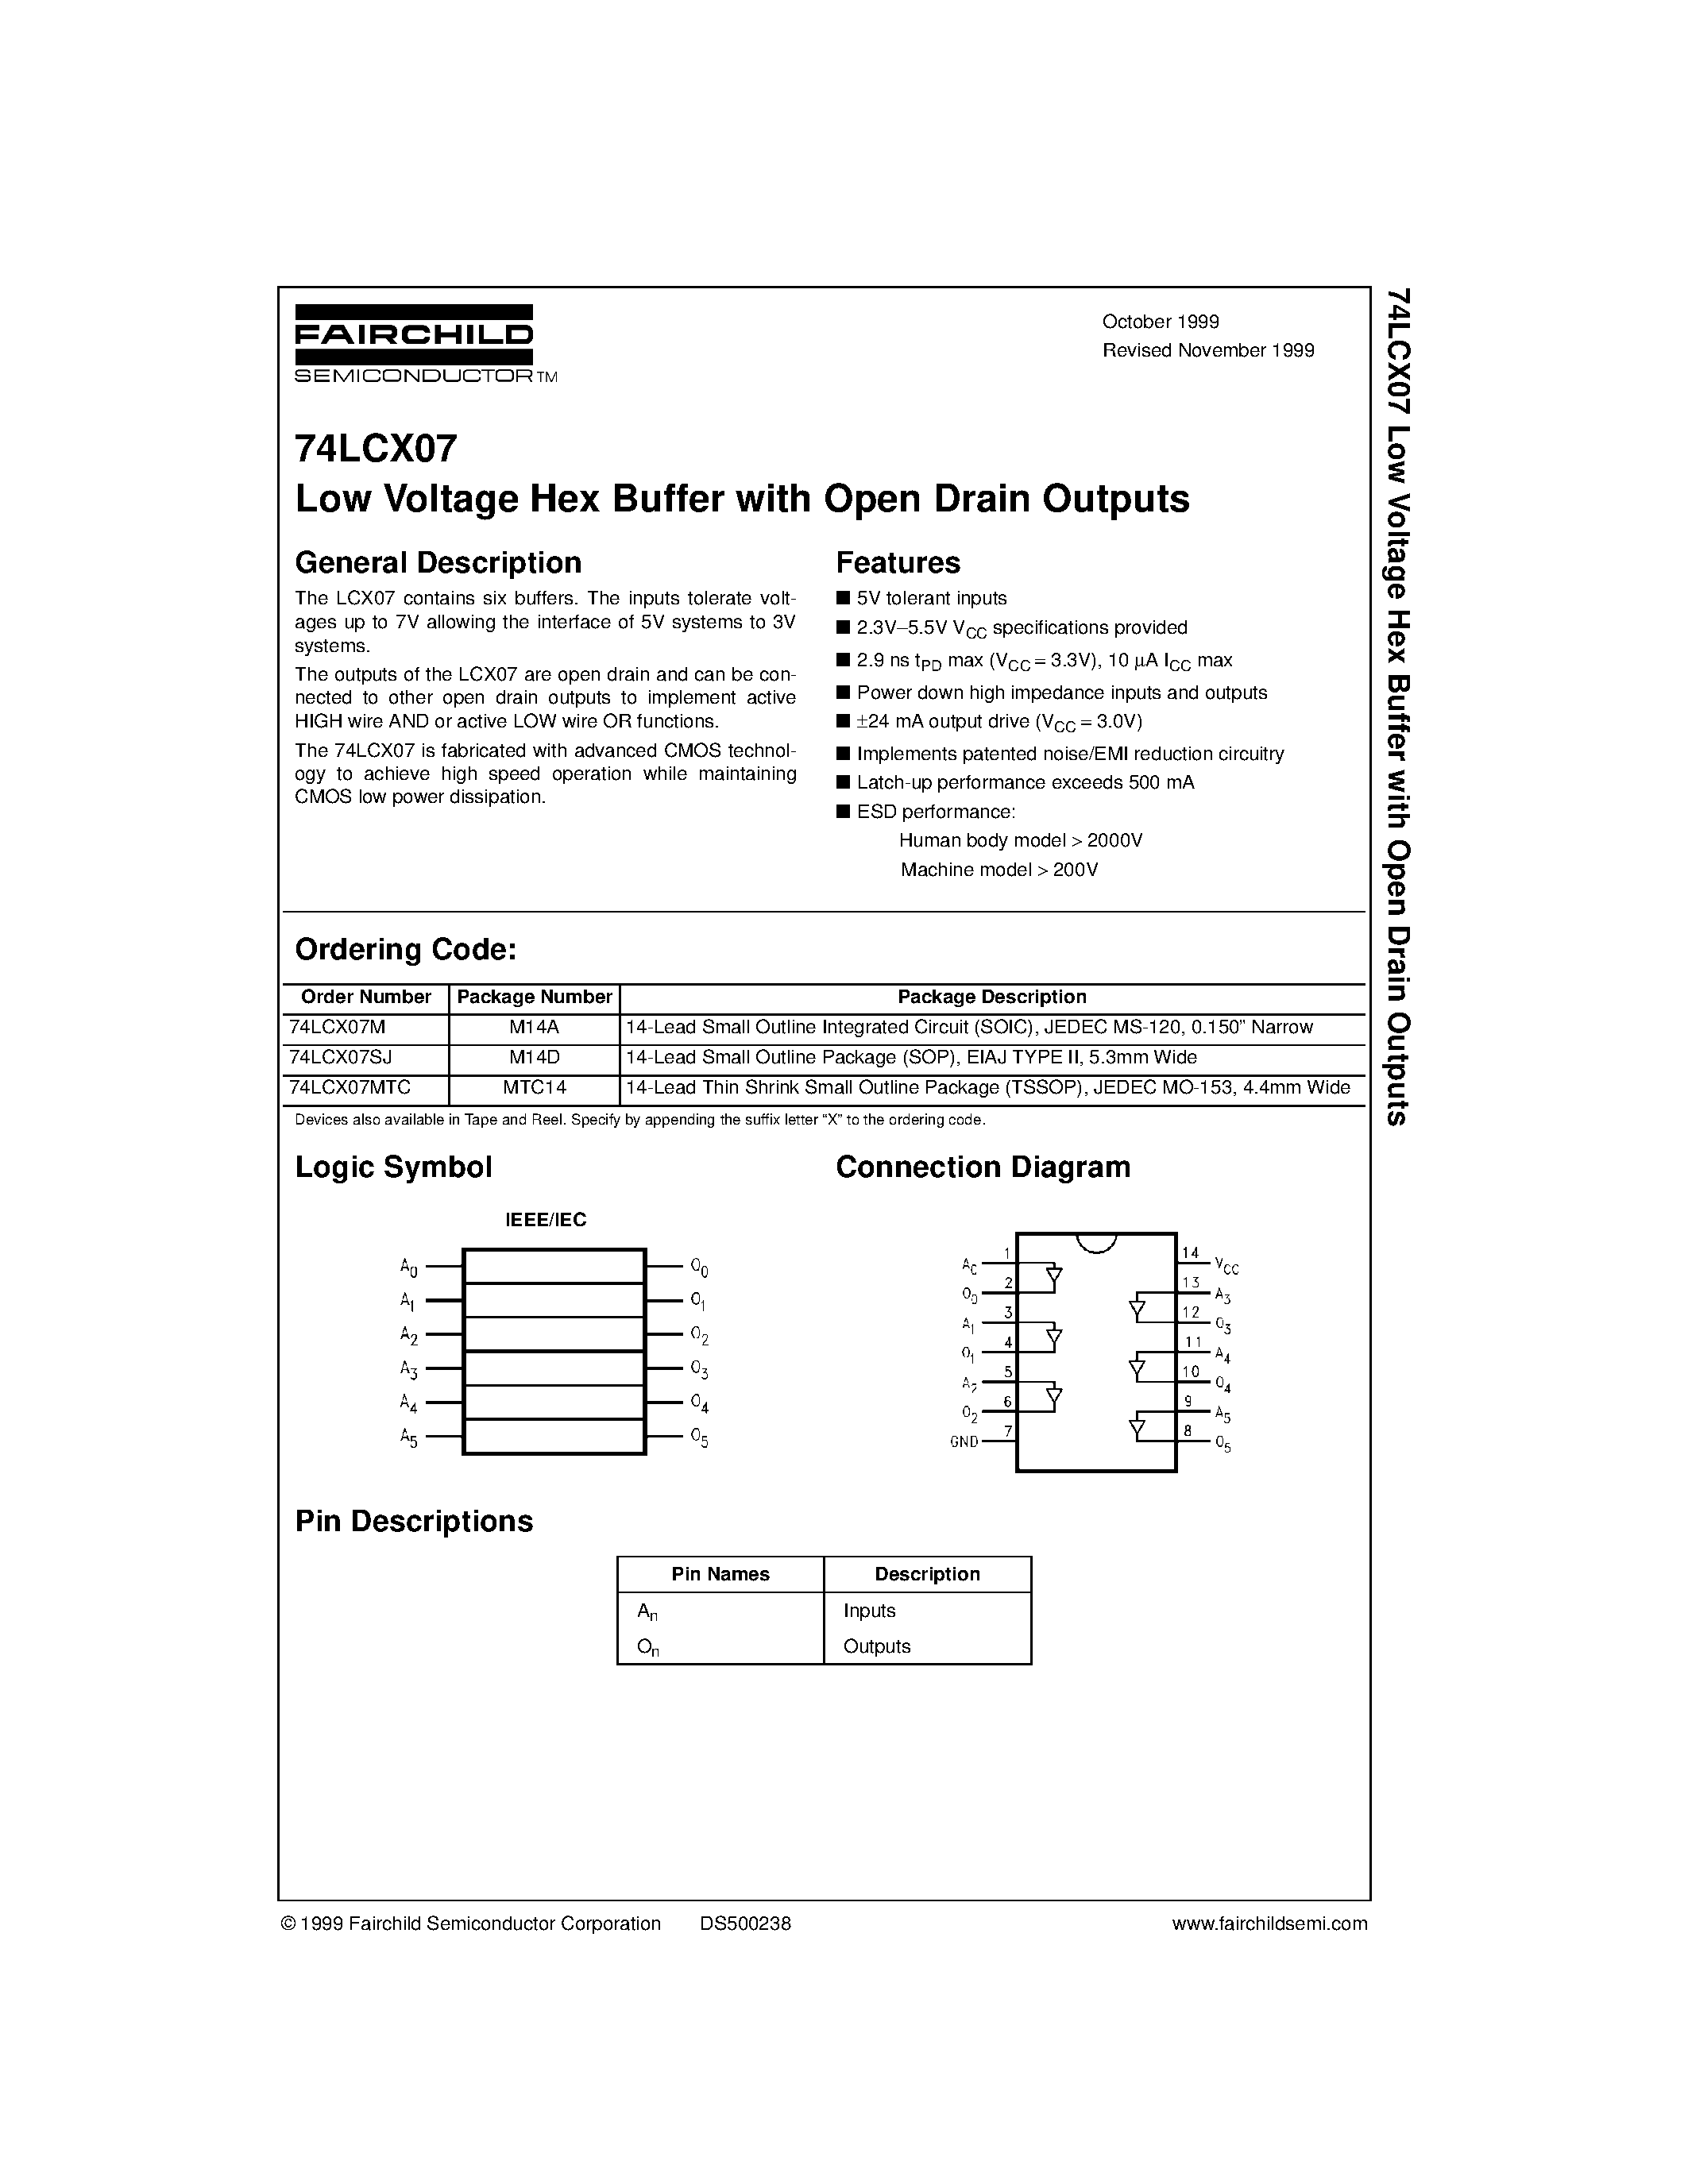 Datasheet 74LCX07M - Low Voltage Hex Buffer with Open Drain Outputs page 1